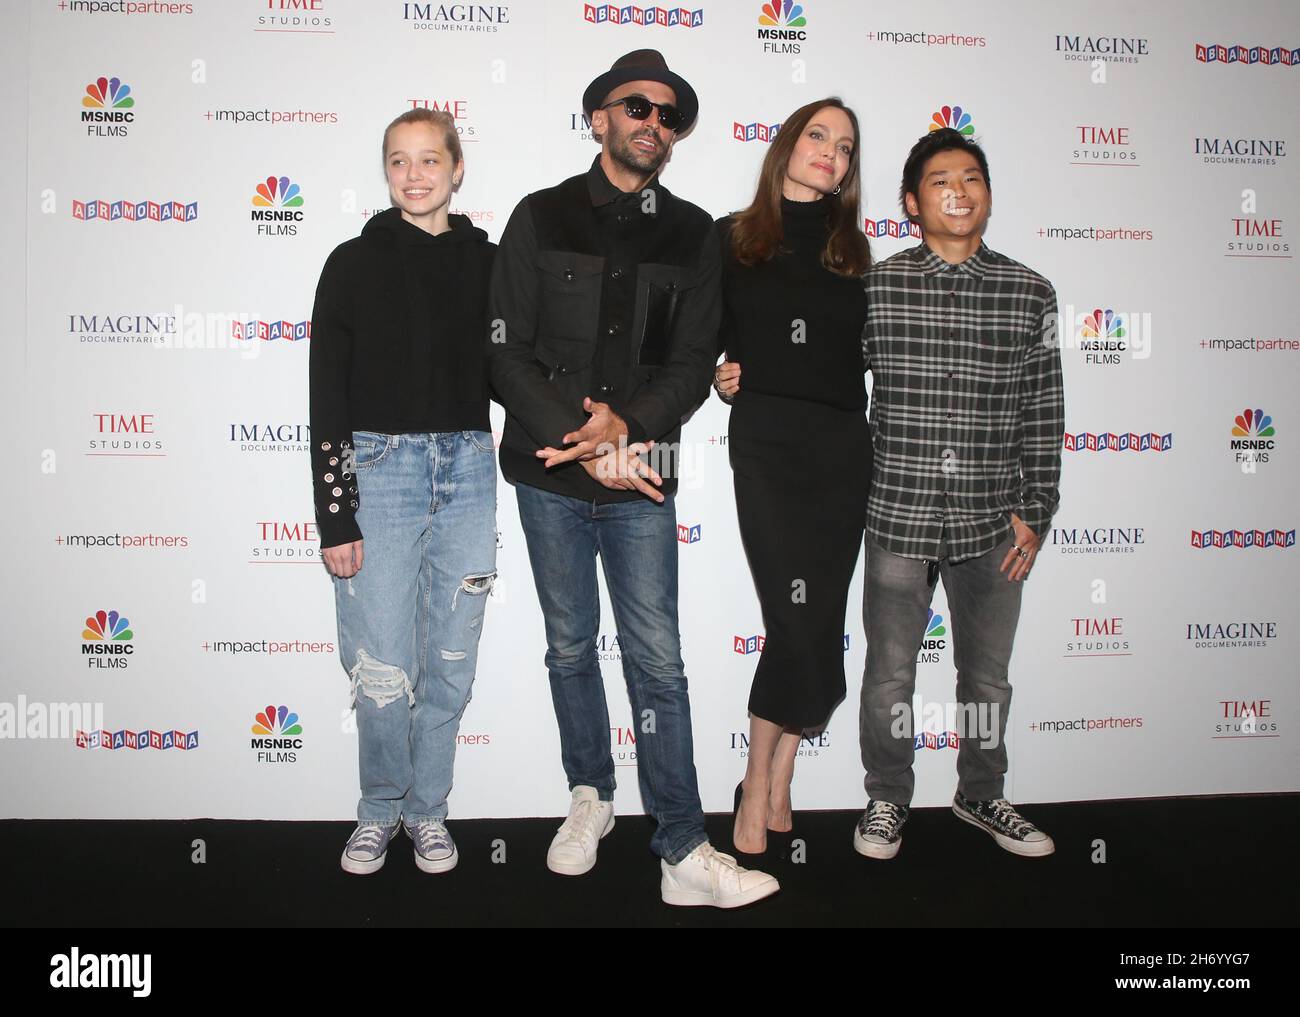 Los Angeles, Ca. 18th Nov, 2021. Shiloh Jolie-Pitt, Angelina Jolie and Pax Thien Jolie-Pitt at Paper & Glue/A JR Project LA Premiere Screening at Museum of Tolerance in Los Angeles, California on November 18, 201. Credit: Faye Sadou/Media Punch/Alamy Live News Stock Photo